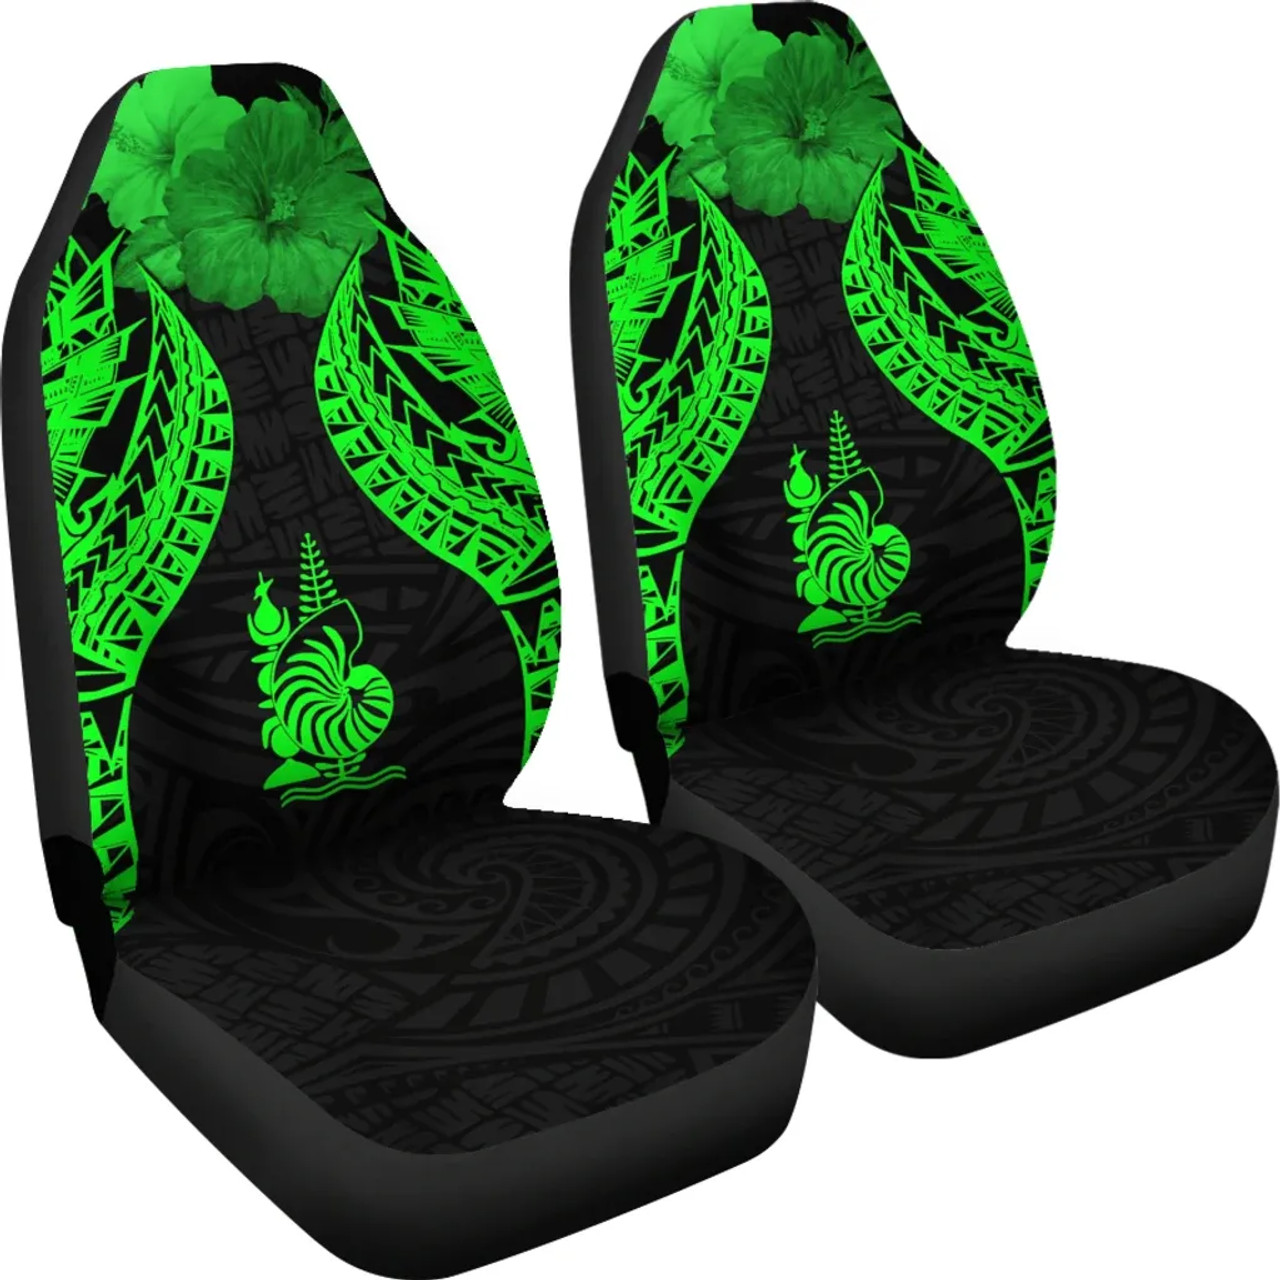 New Caledonia Polynesian Car Seat Covers Pride Seal And Hibiscus Green